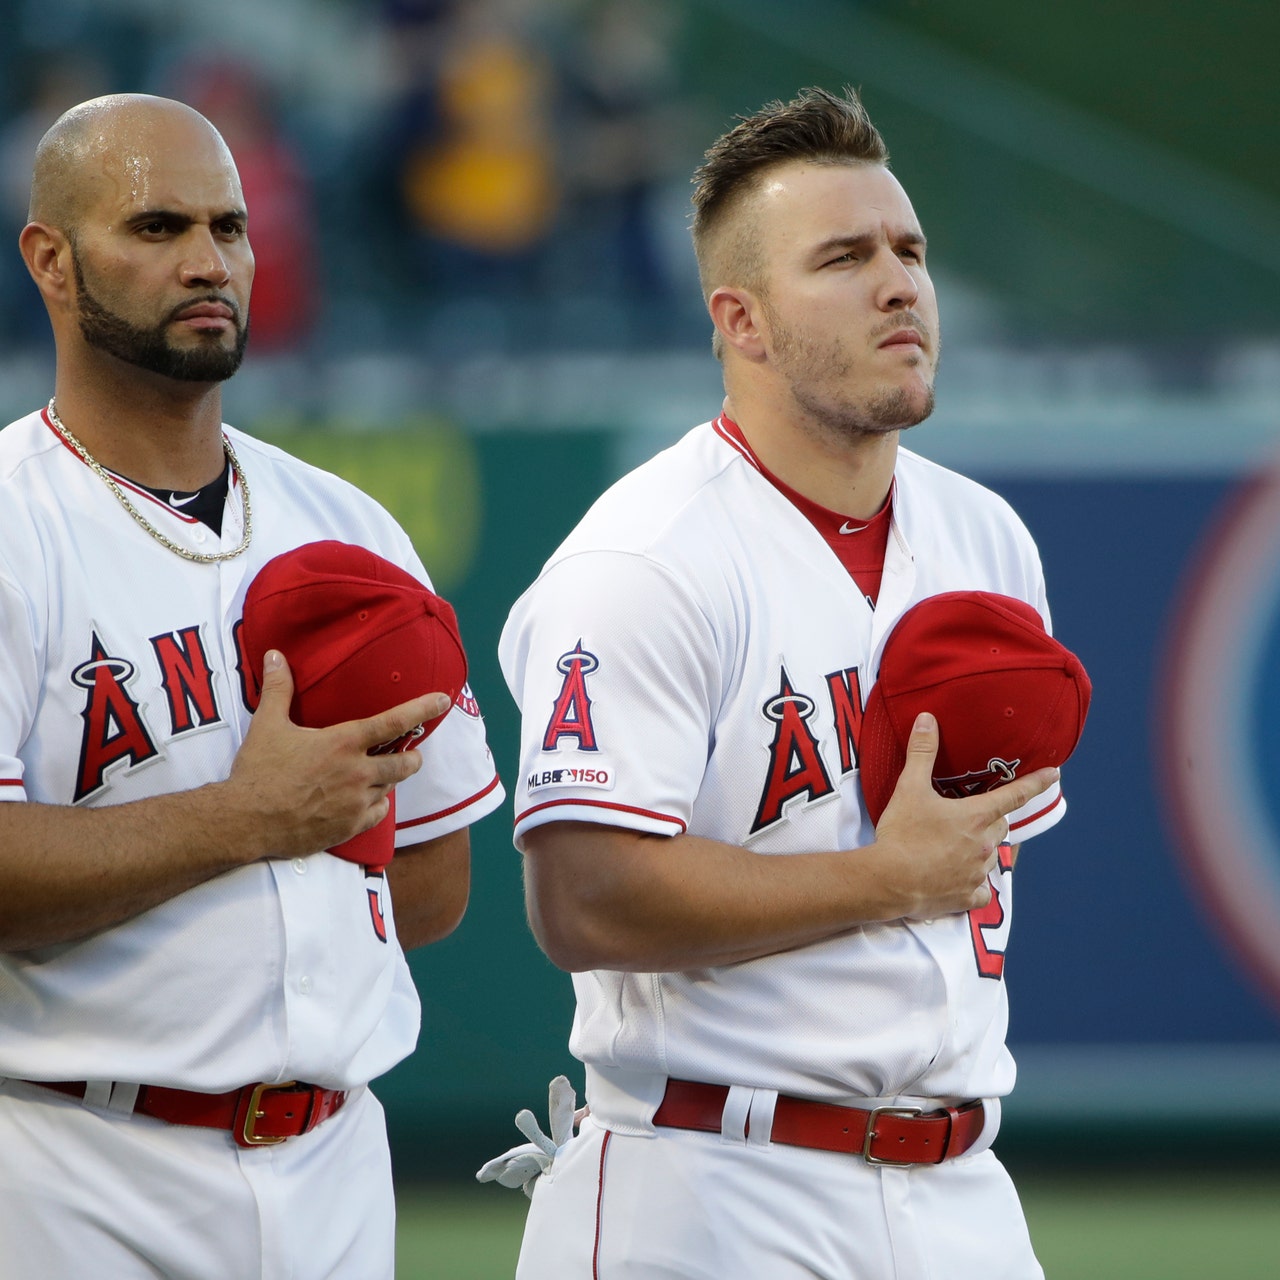 A still-grieving Mike Trout returns to Angels and honors late